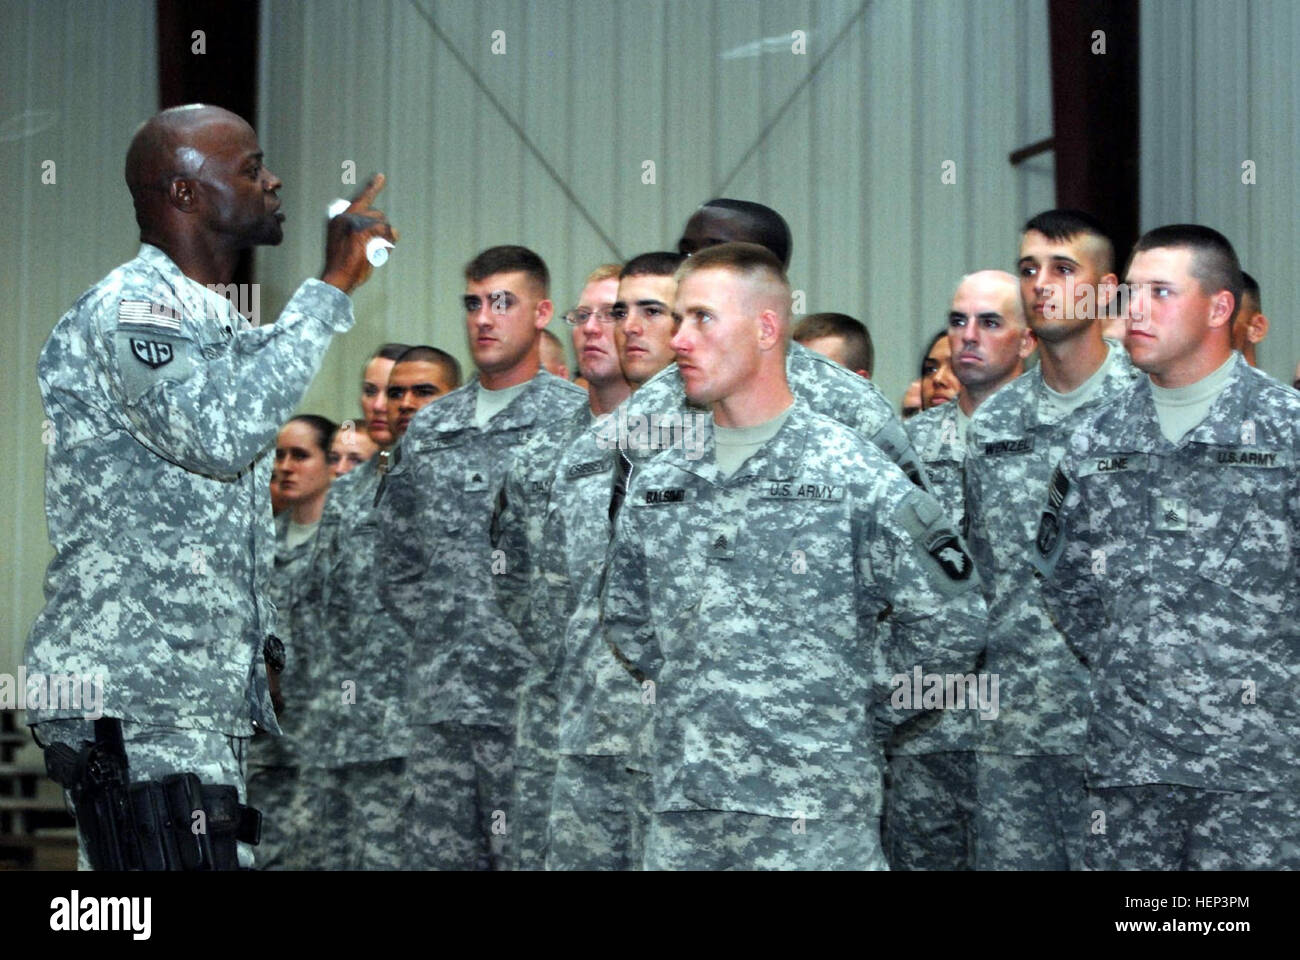 Command Sgt. Maj. Bernard McPherson, native of Orangeburg, S.C., and command sergeant major of the 18th Military Police Brigade addresses seventy-four newly inducted non-commissioned officers of the 716th Military Police Battalion, 18th MP Bde., Multi-National Division-Baghdad, into the Corps of NCOs June 21 at Camp Liberty during a NCO induction ceremony. The 716th MP Bn. is deployed from Fort Campbell, Ky. Maintaining the standard in Iraq 96055 Stock Photo